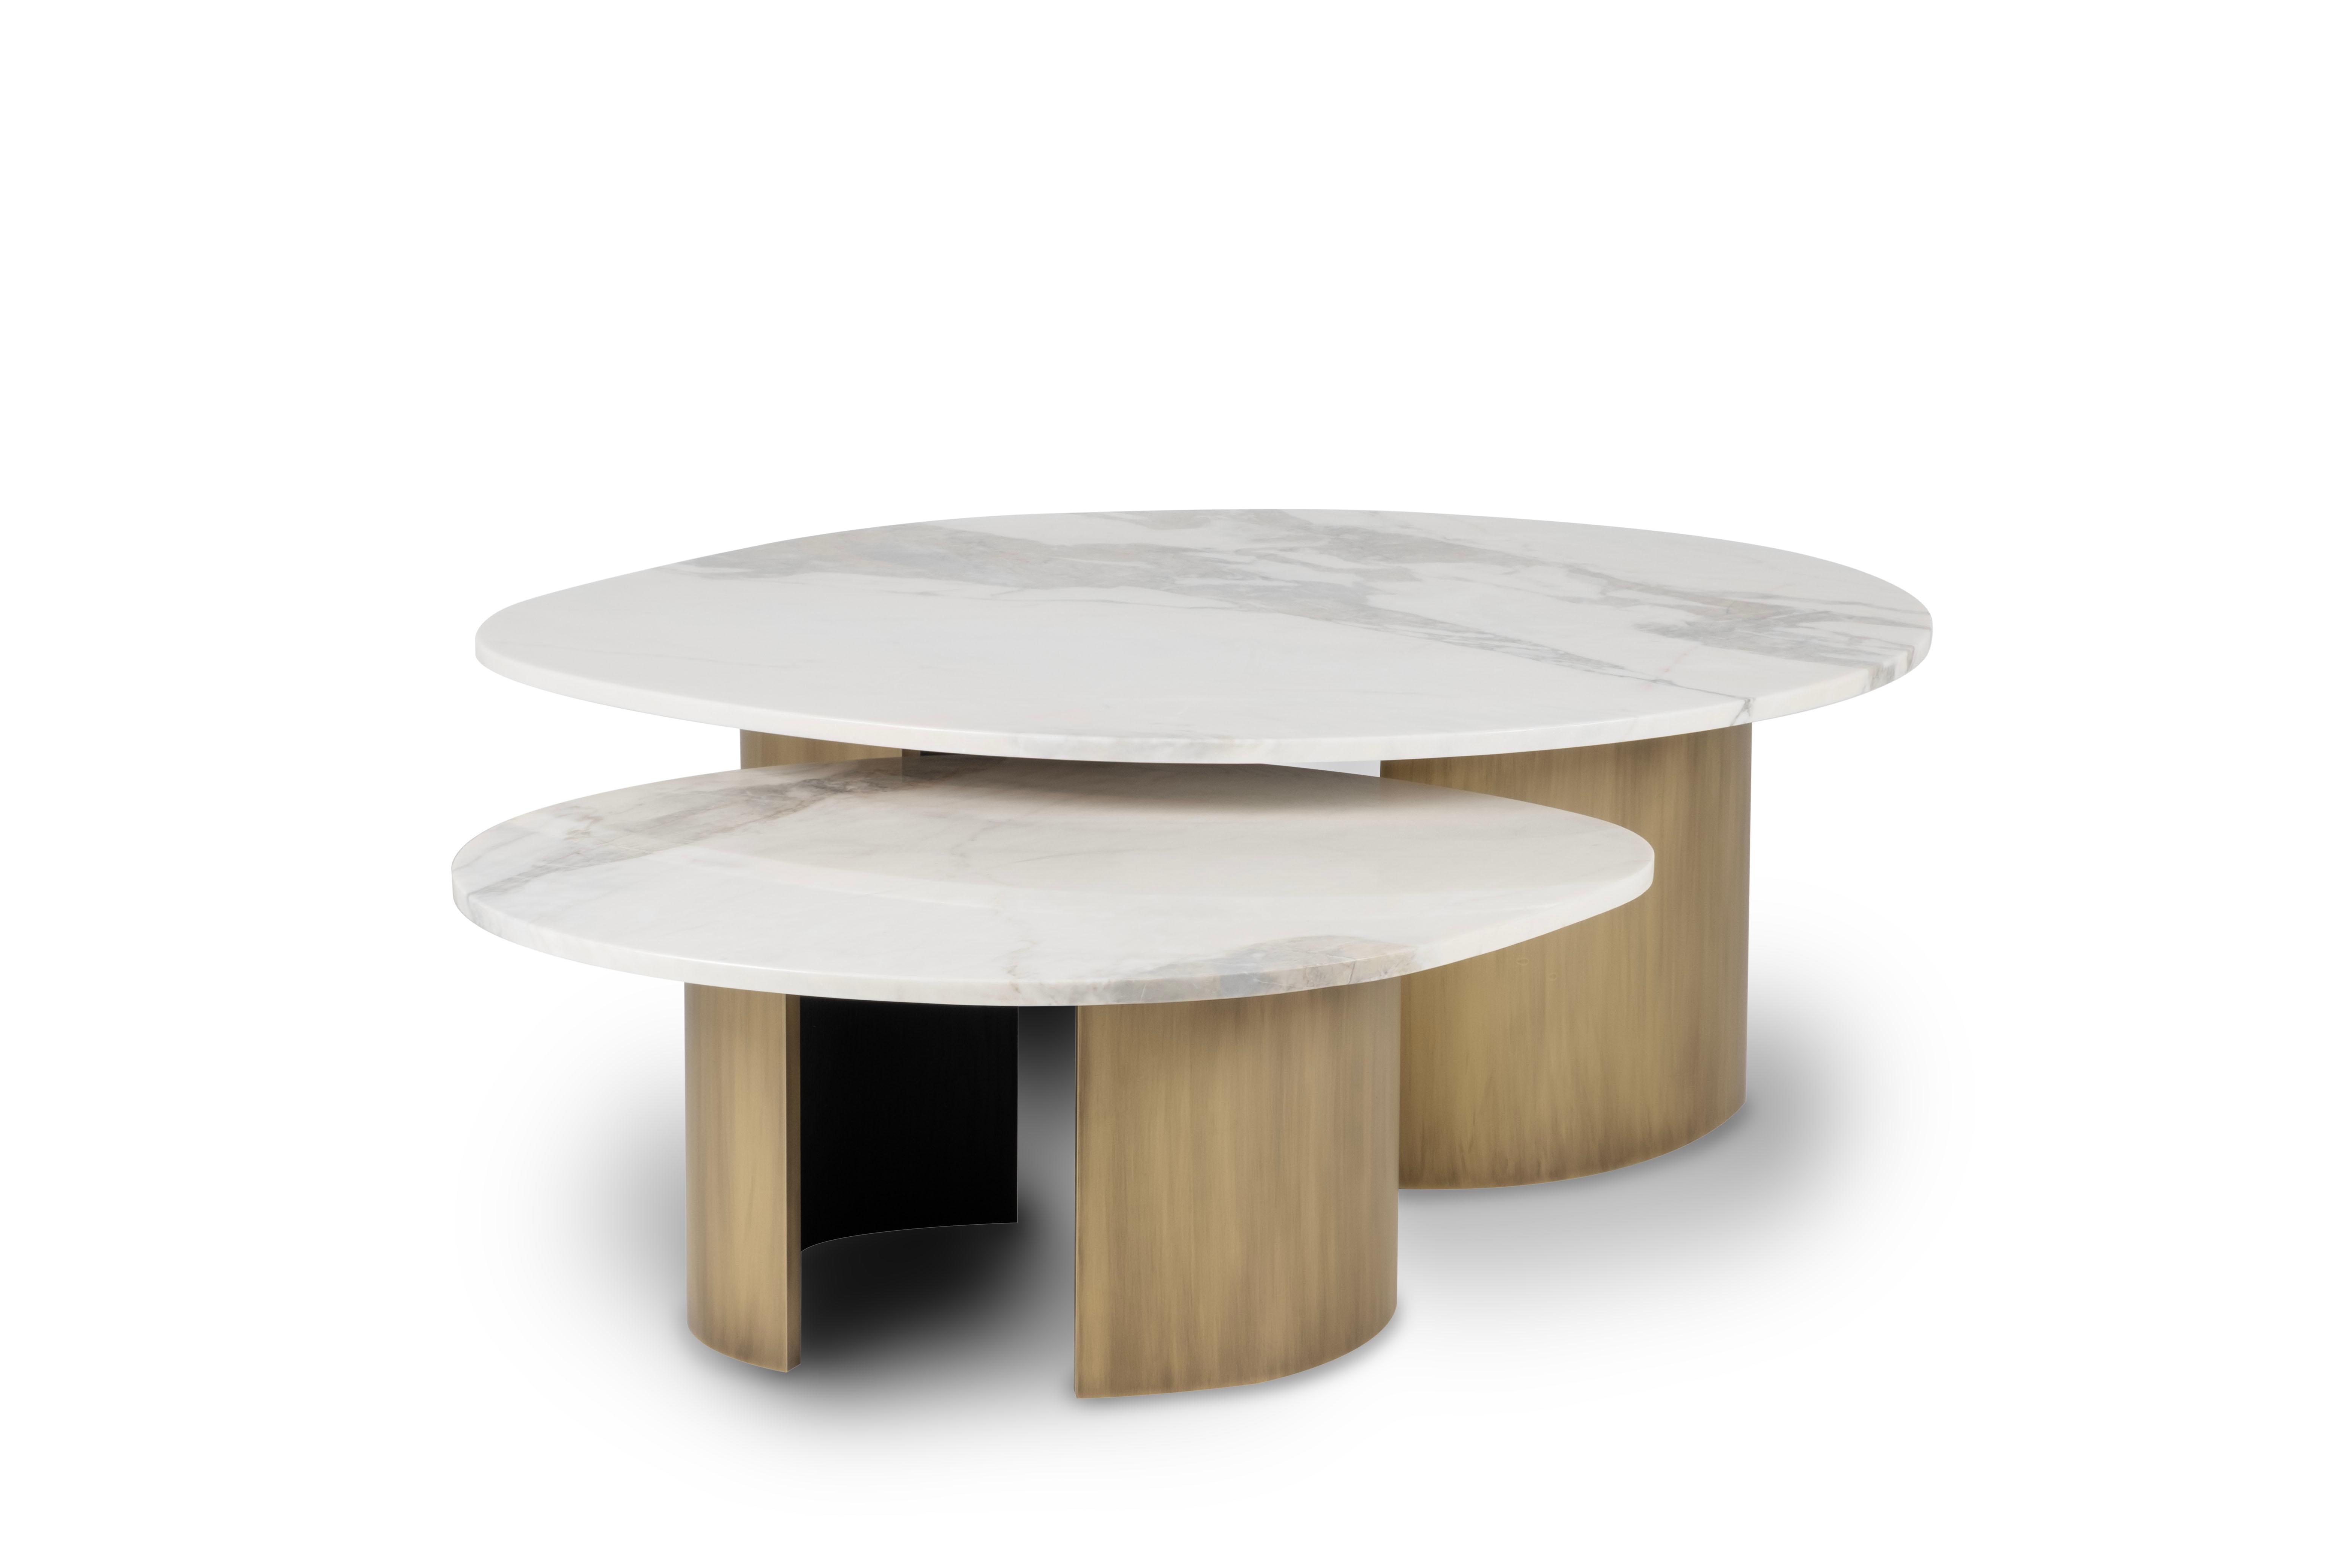 Landscape coffee tables, Contemporary Collection, Handcrafted in Portugal - Europe by Greenapple.

Designed by Rute Martins for the Contemporary Collection, the Landscape coffee table is inspired by fluid lines in nature, adding a representation of